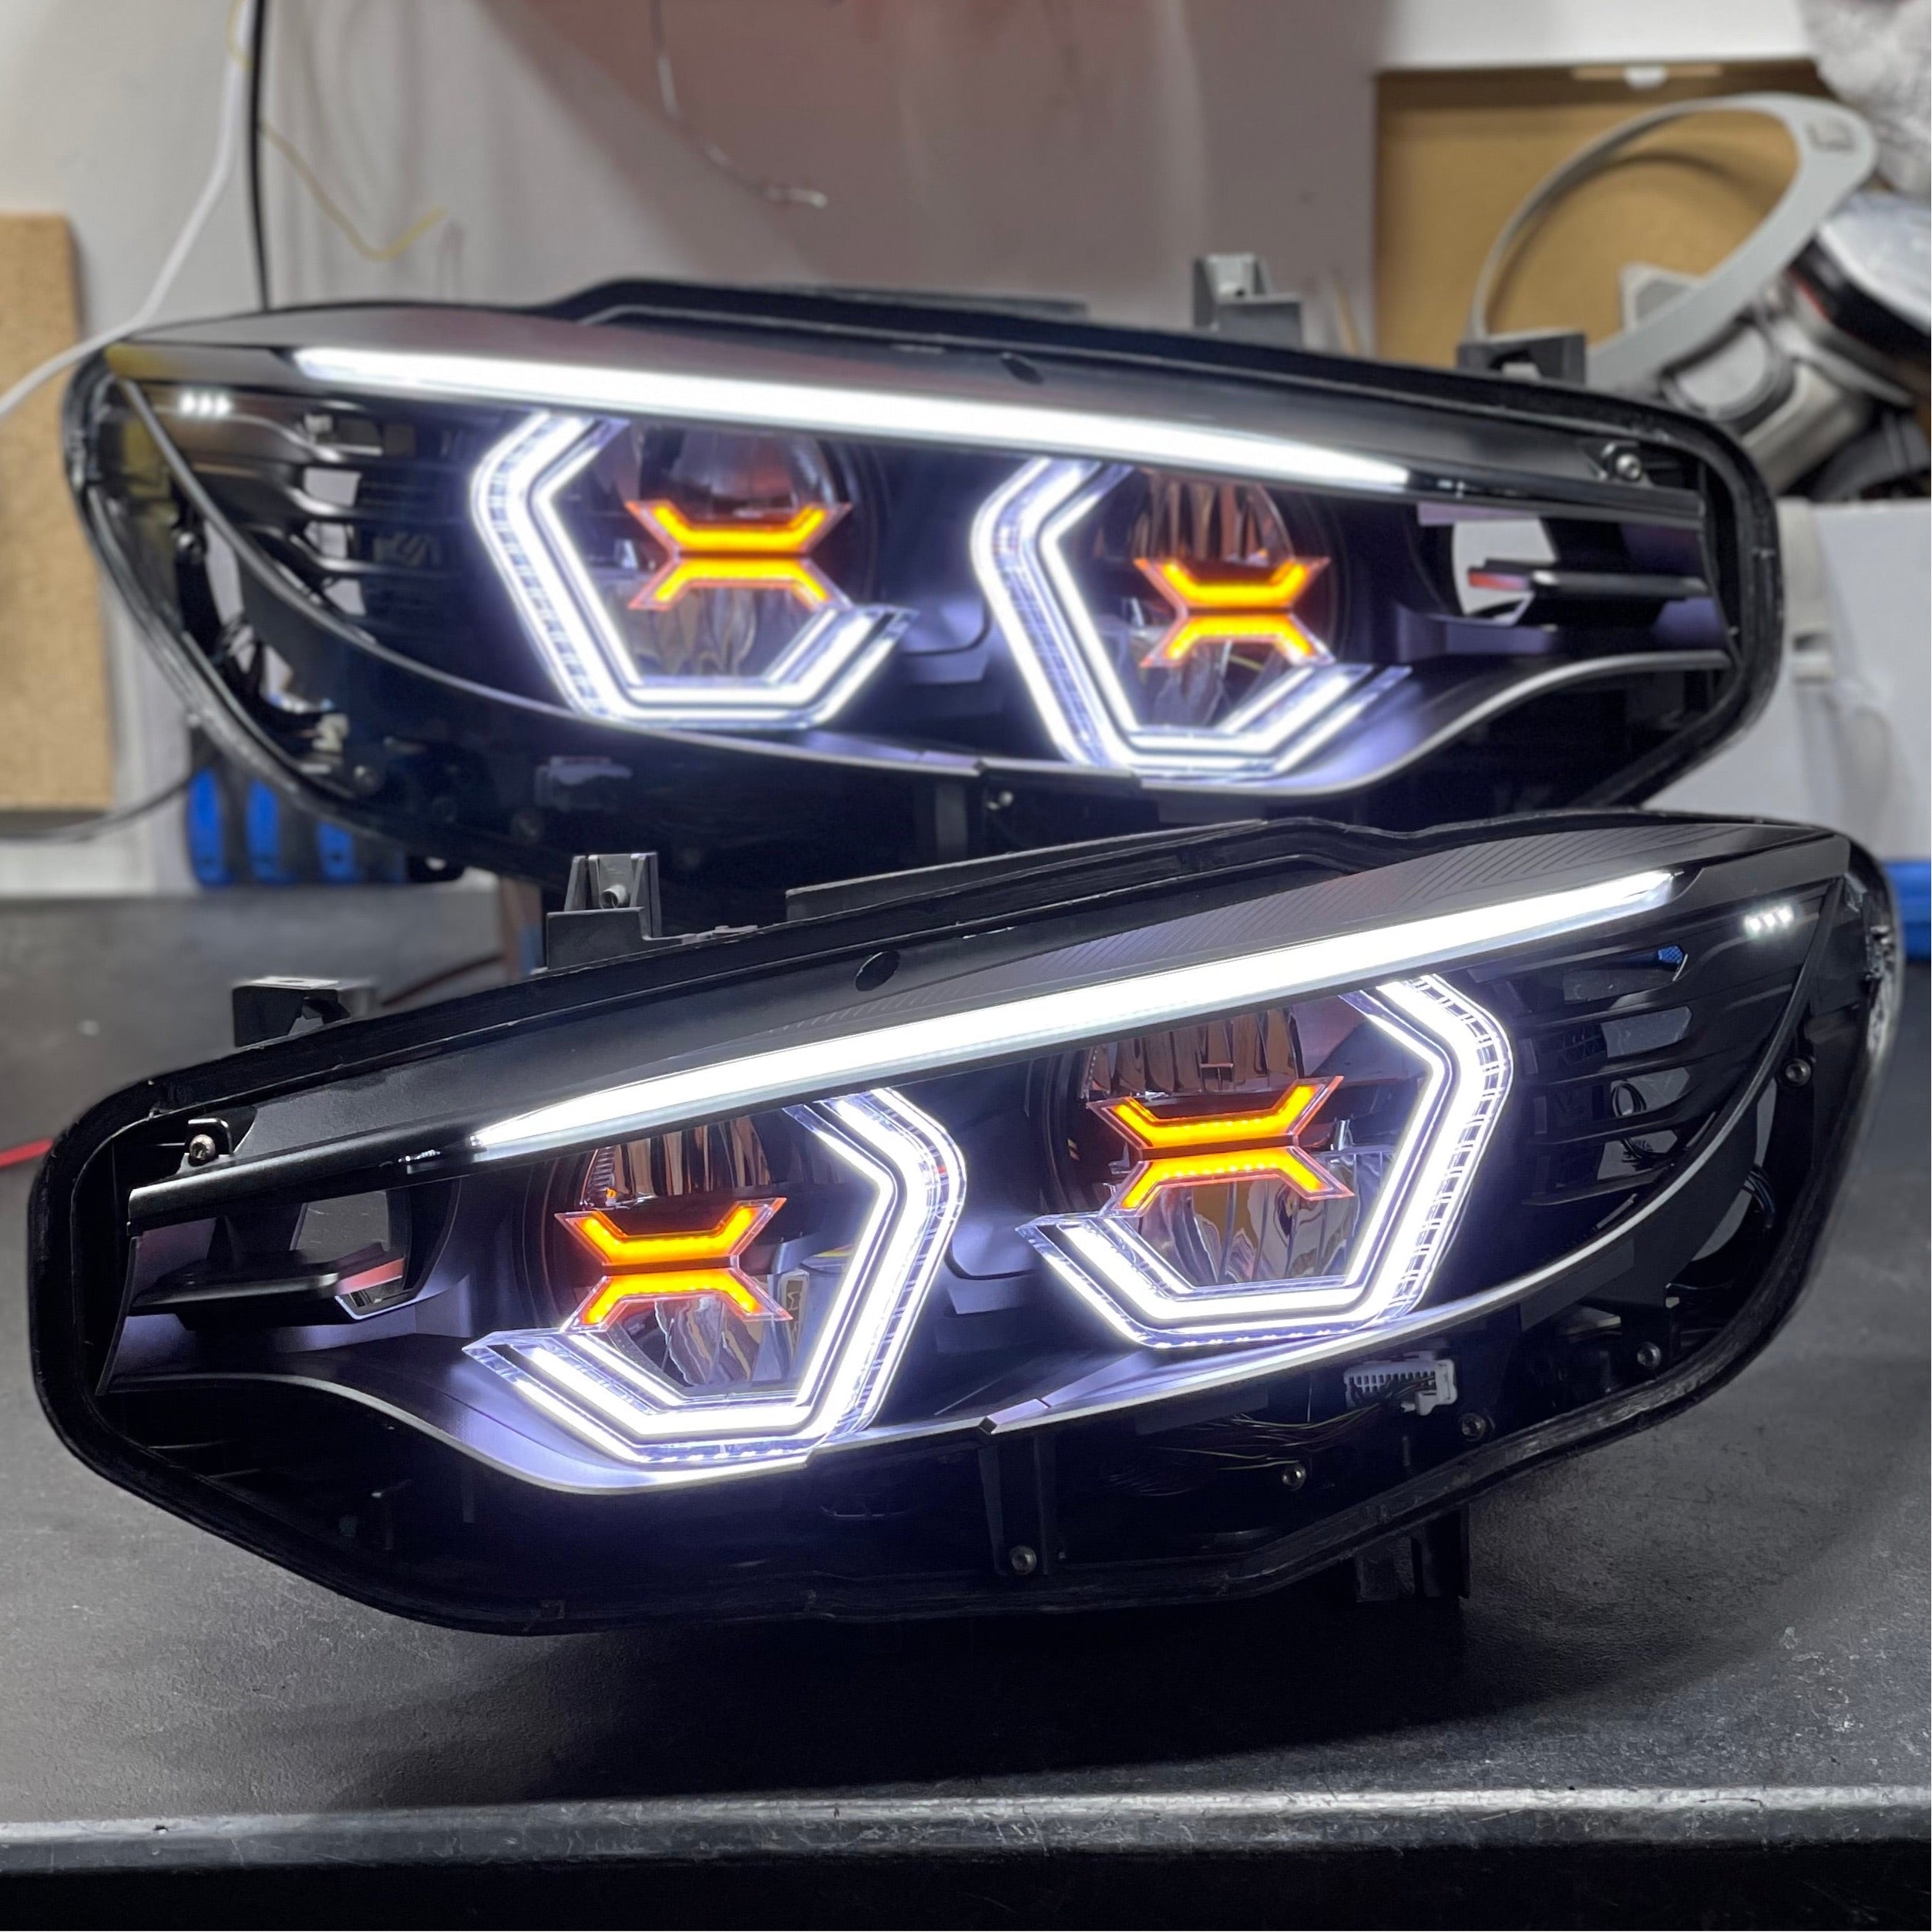 PRE-BUILT F8X F80 M3 F82 F83 M4 F32 F36 Vision Concept Headlights With Amber Concept X (2015 - 2017 LED Headlights Only)